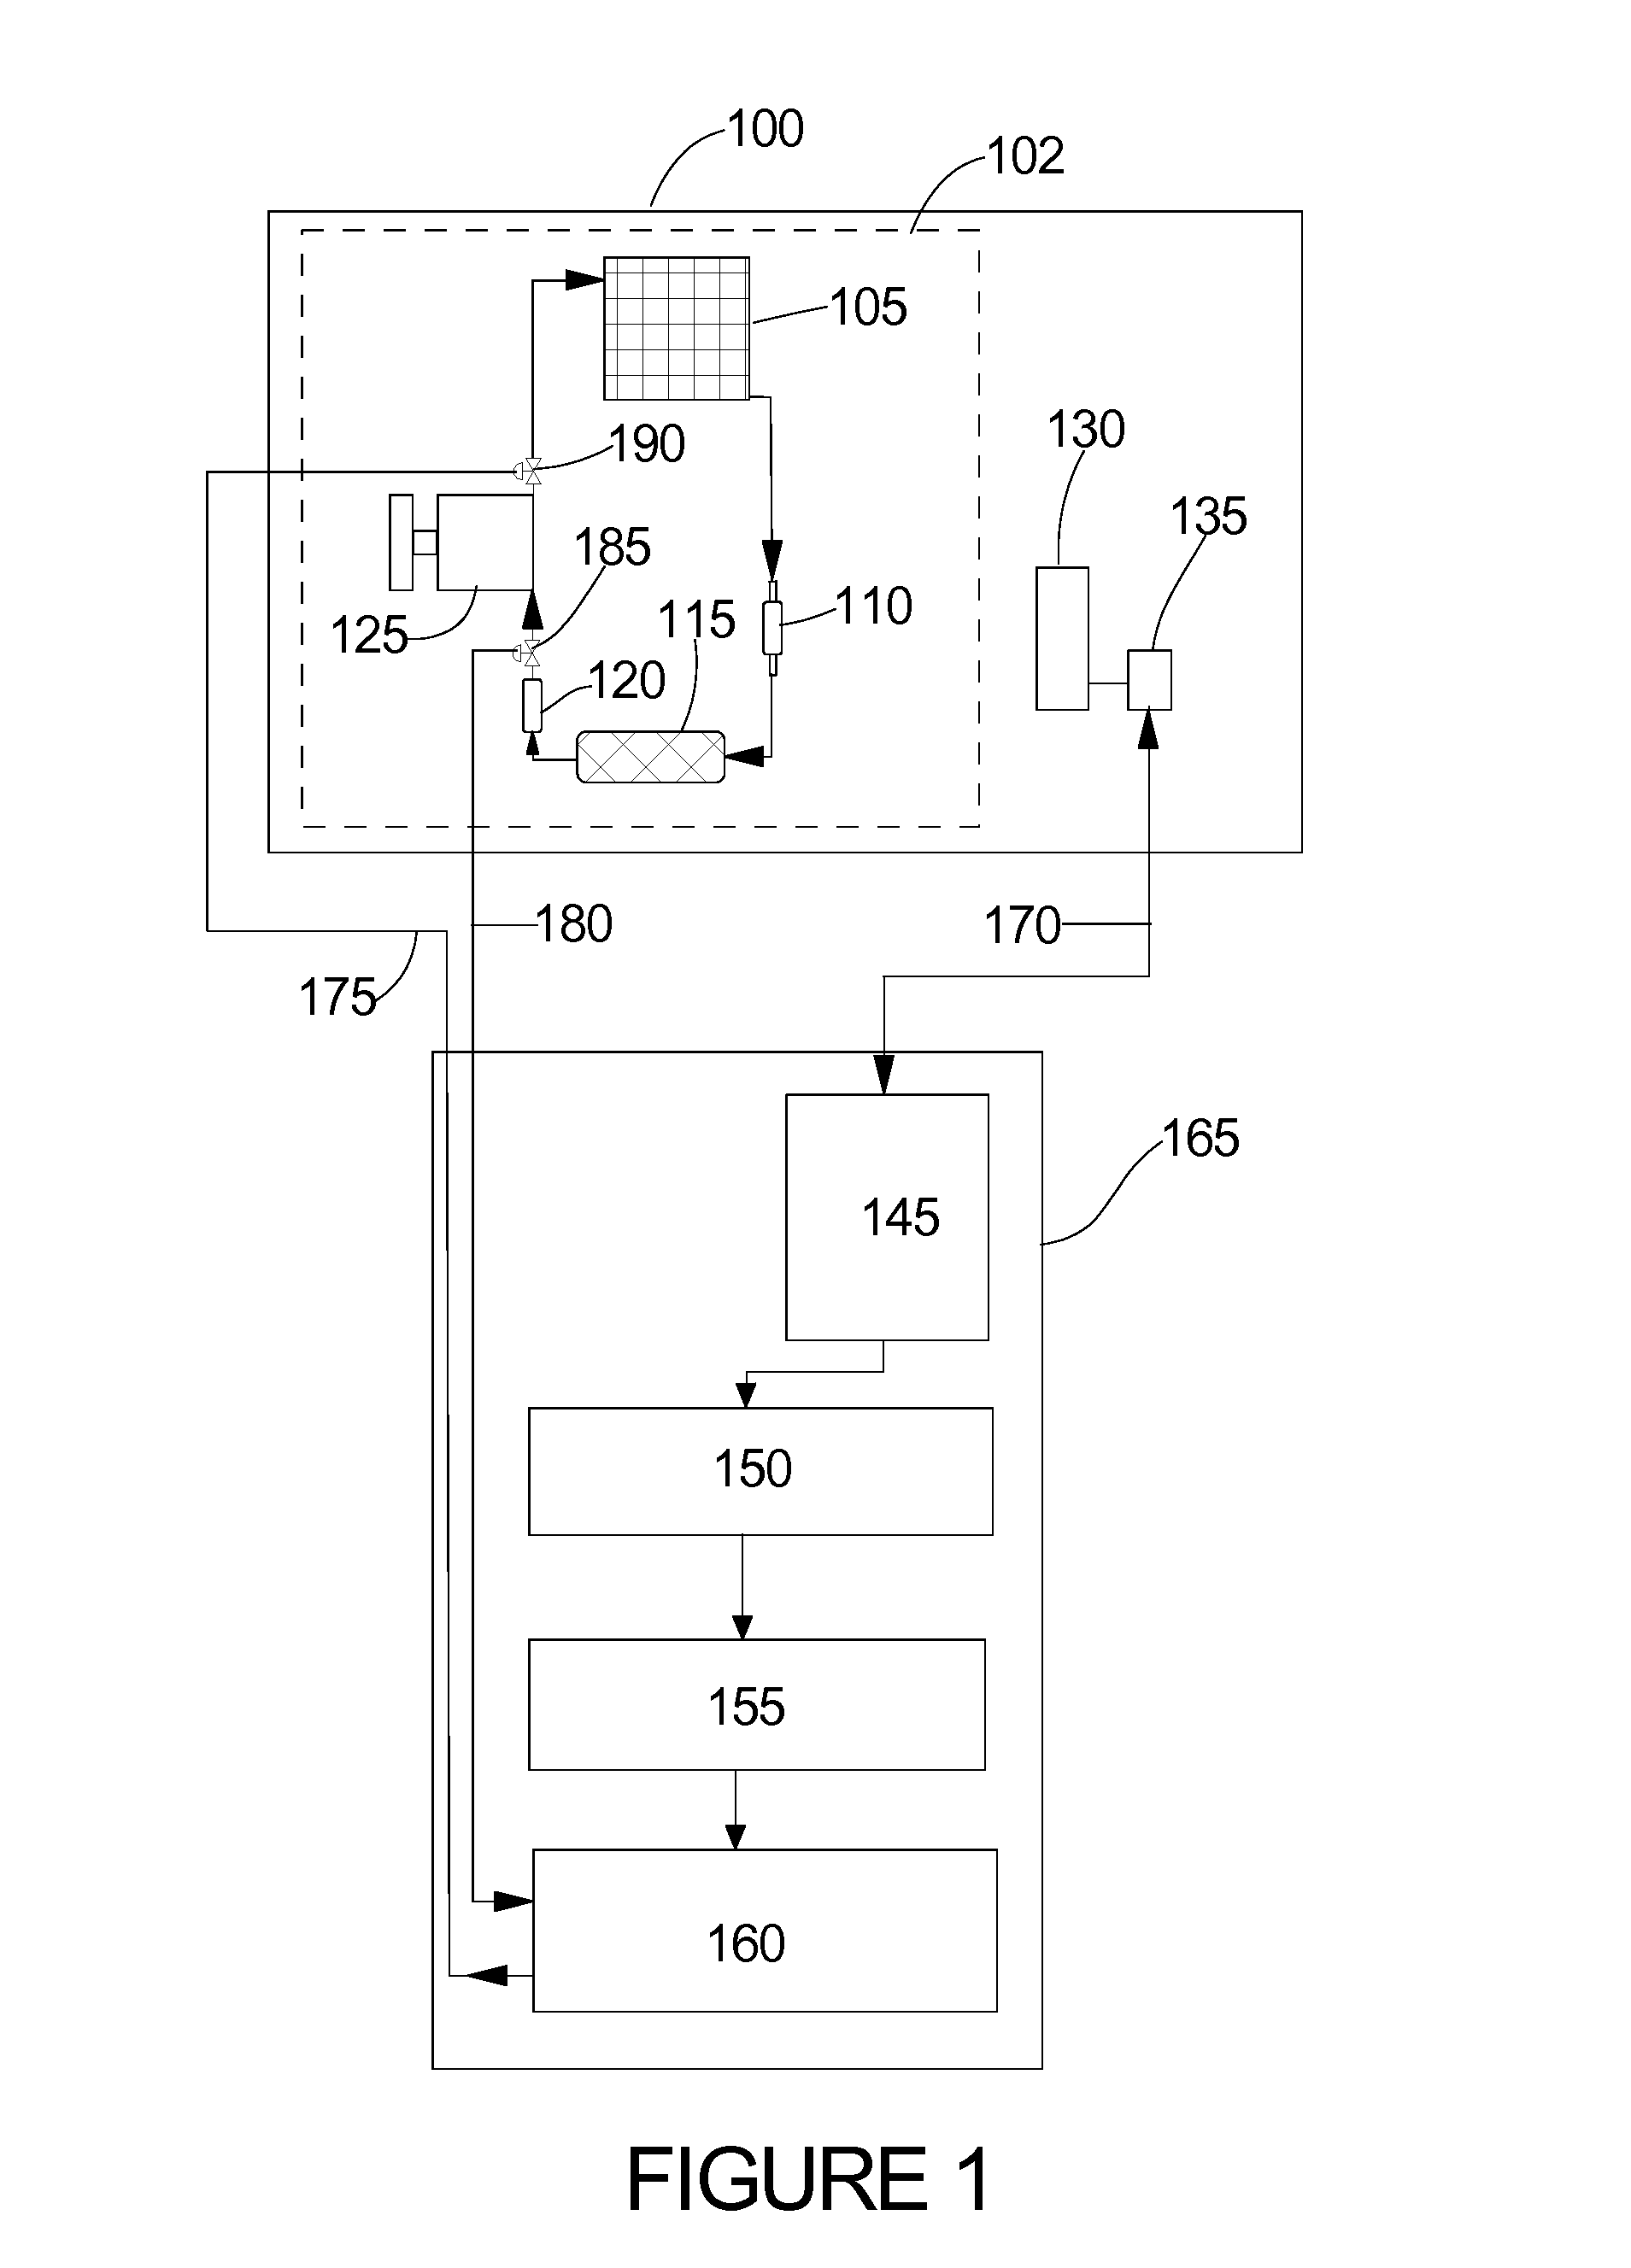 Motor vehicle servicing system and method with automatic data retrieval and lookup of fluid requirements